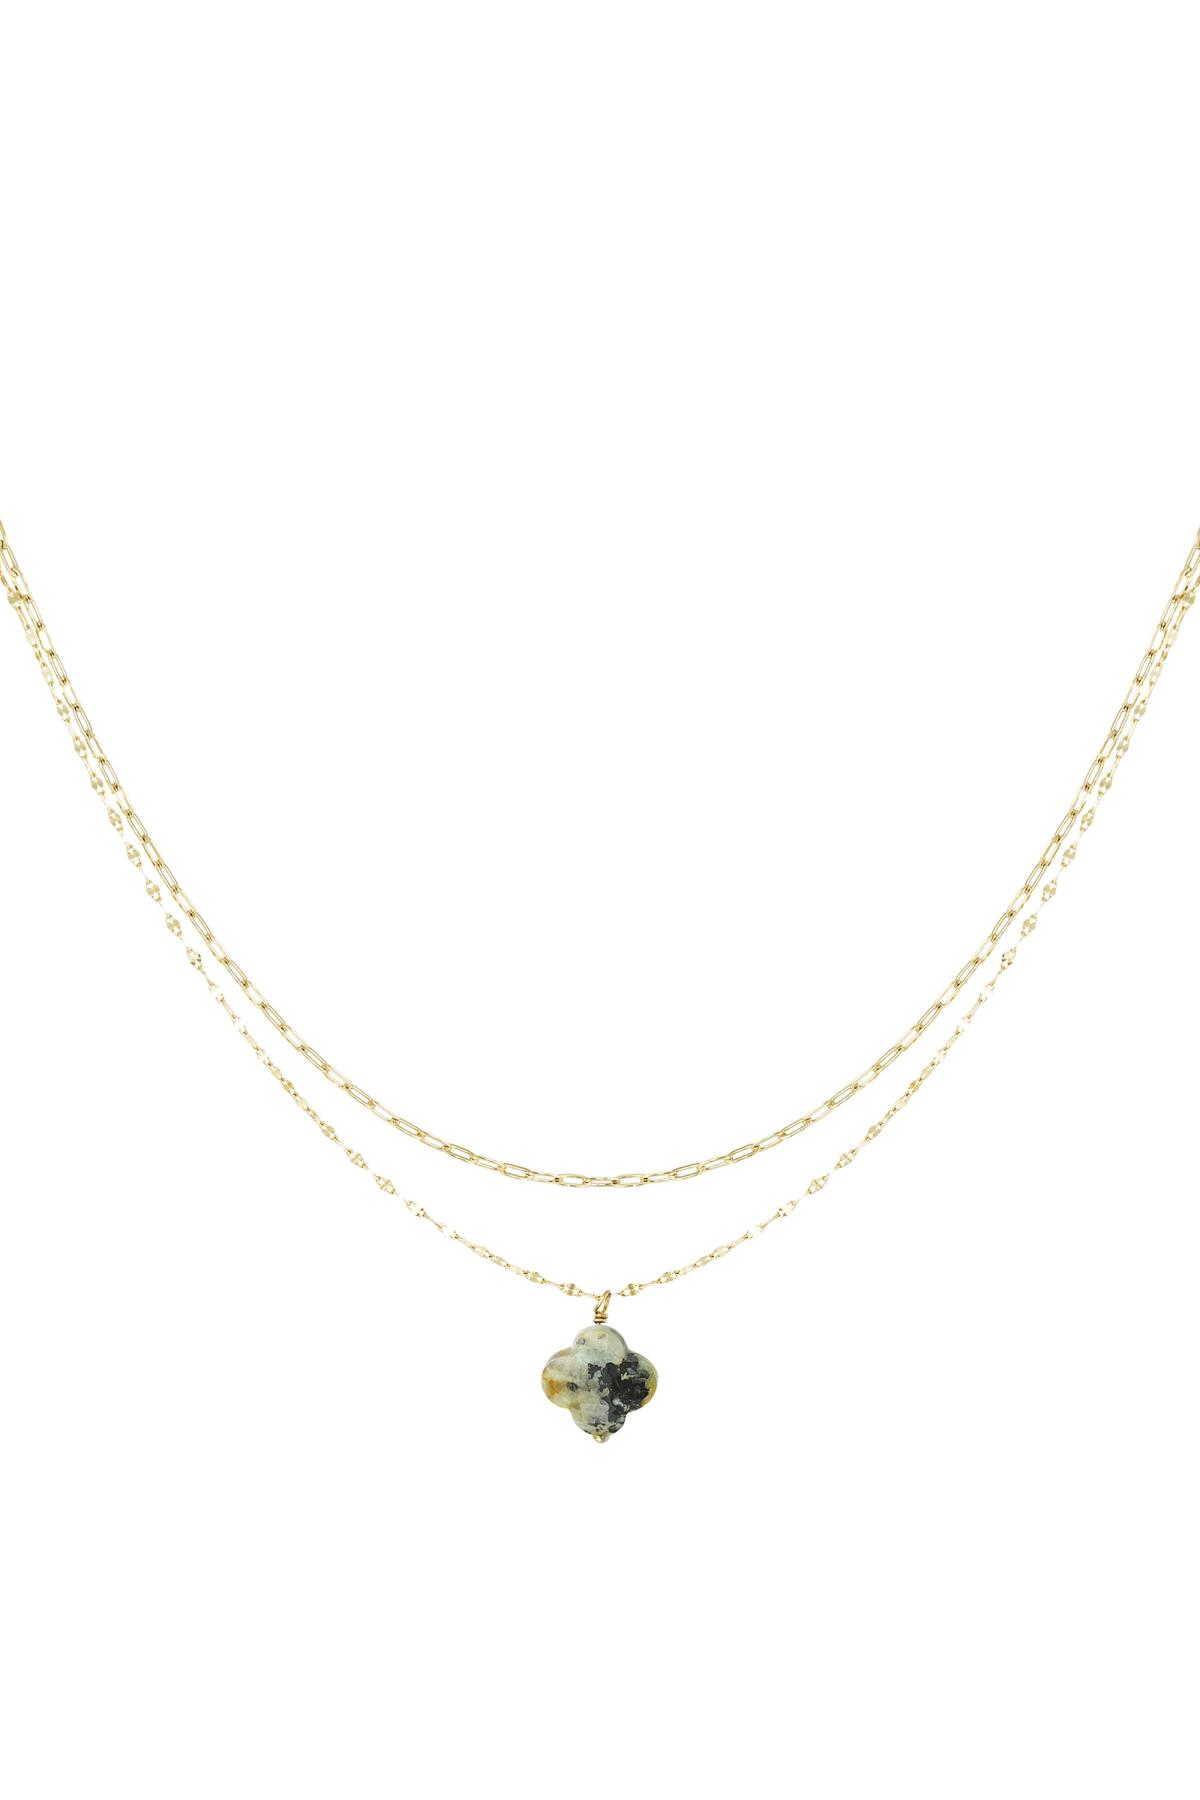 Double necklace with clover pendant - Natural stones collection Green Stainless Steel